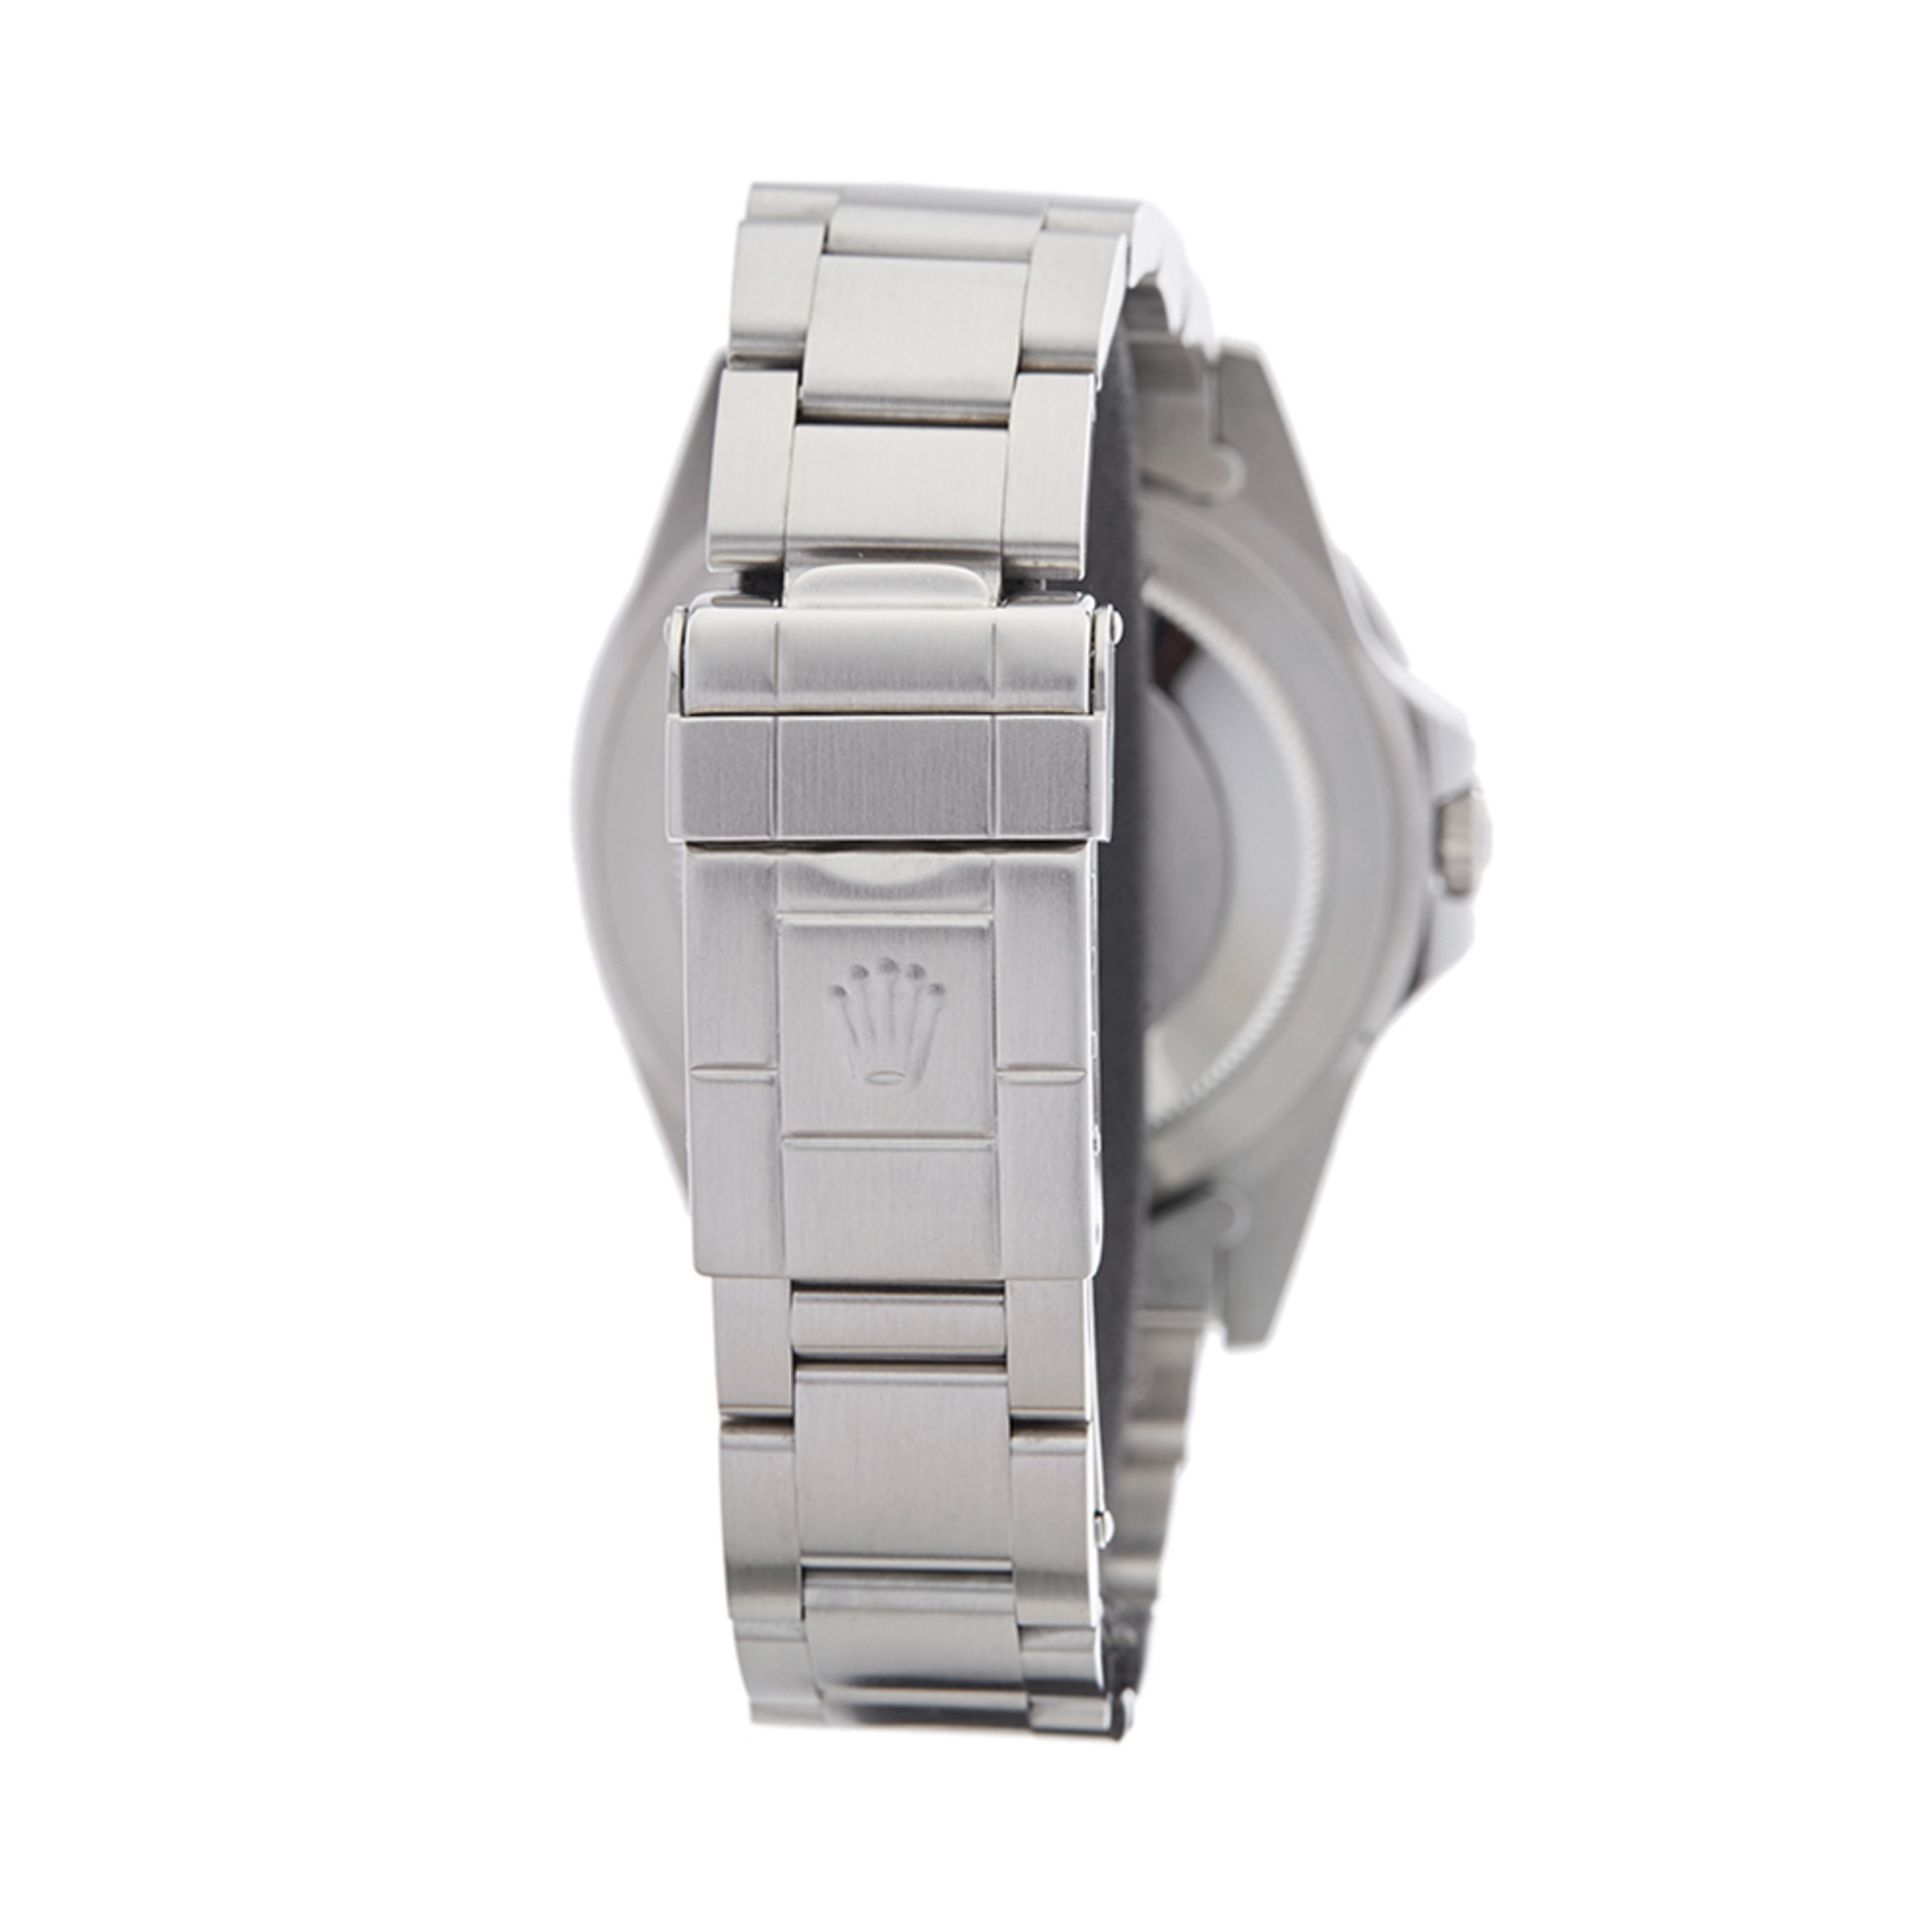 GMT-Master 40mm Stainless Steel - 16700 - Image 6 of 8